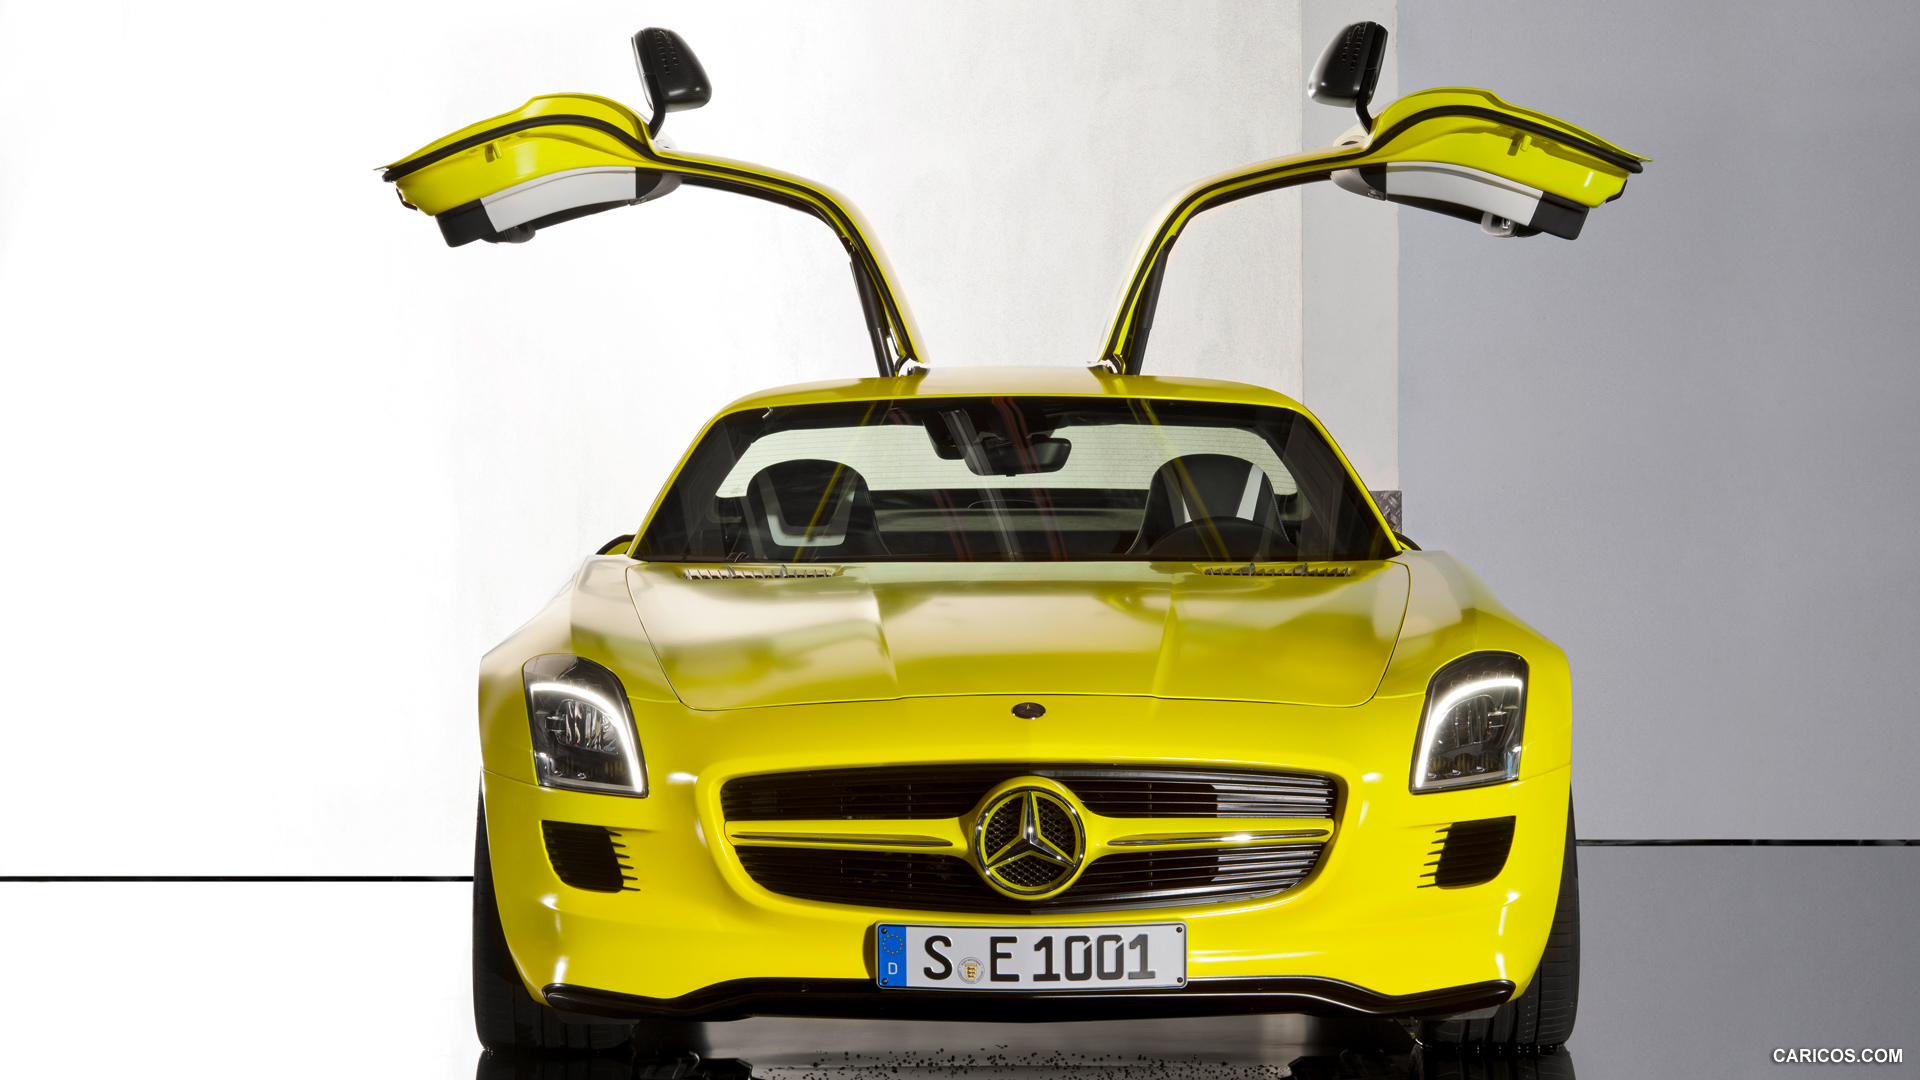 Mercedes-Benz SLS AMG E-CELL Concept  - Front, #44 of 60